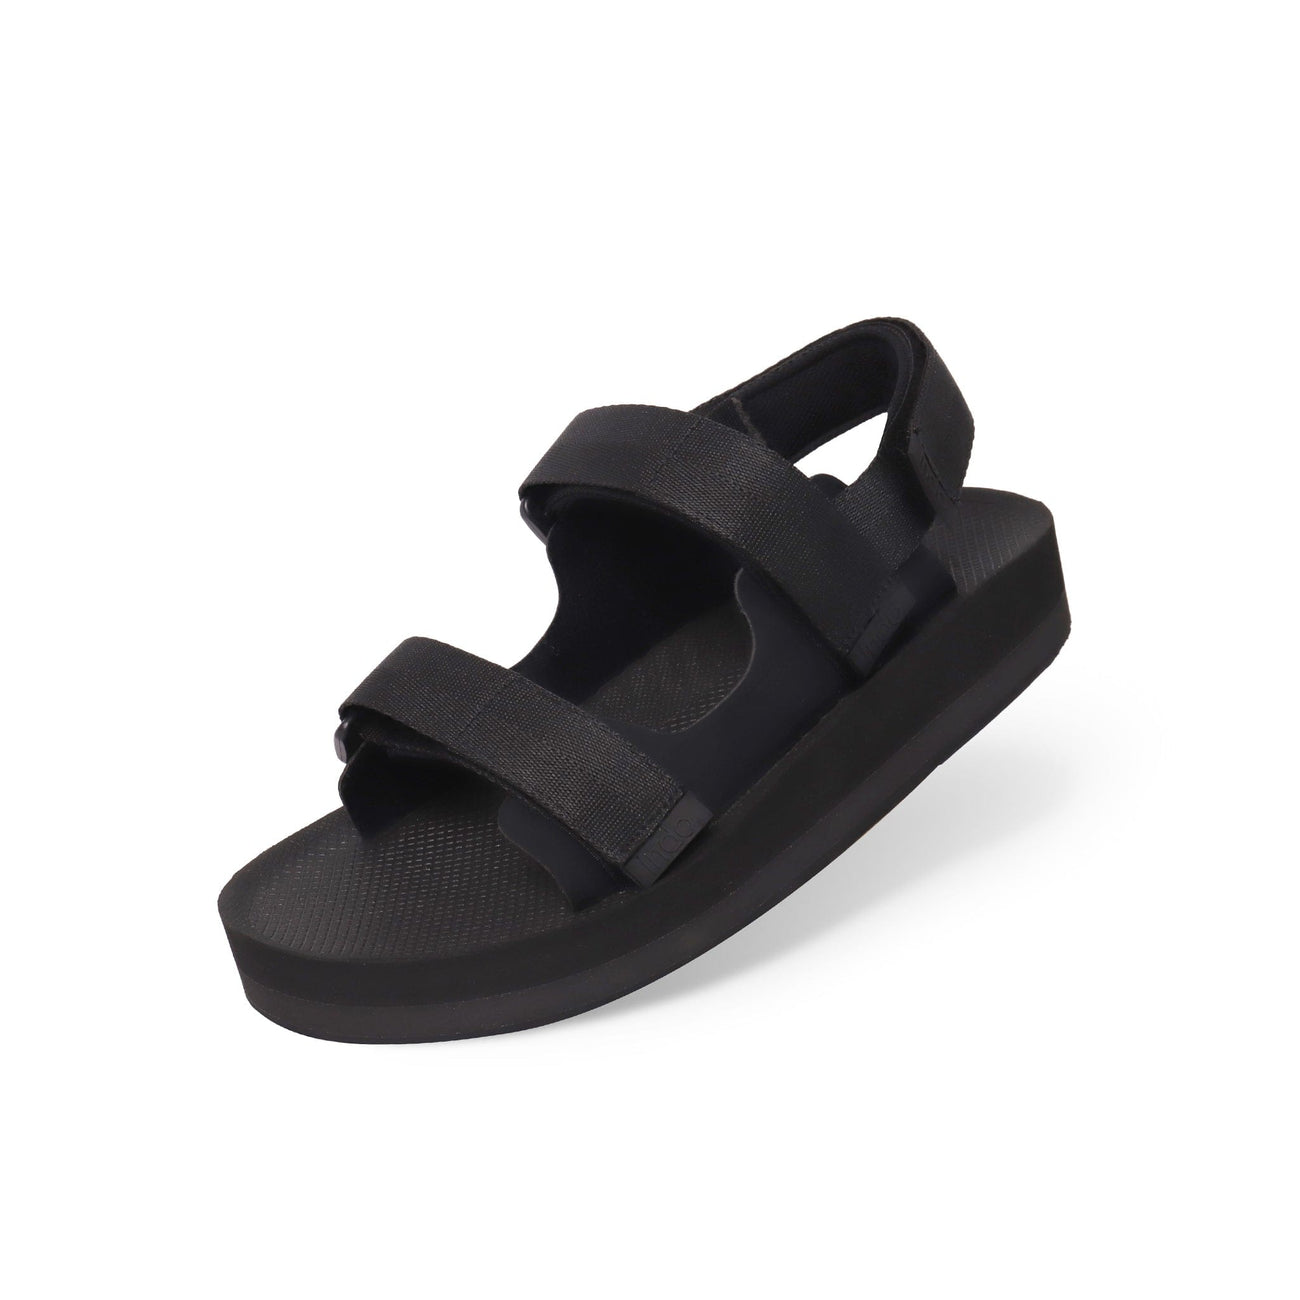 Indosole - Women's Adventurer Sandal - all things being eco chilliwack canada - vegan footwear - women's clothing and accessories - shoe store